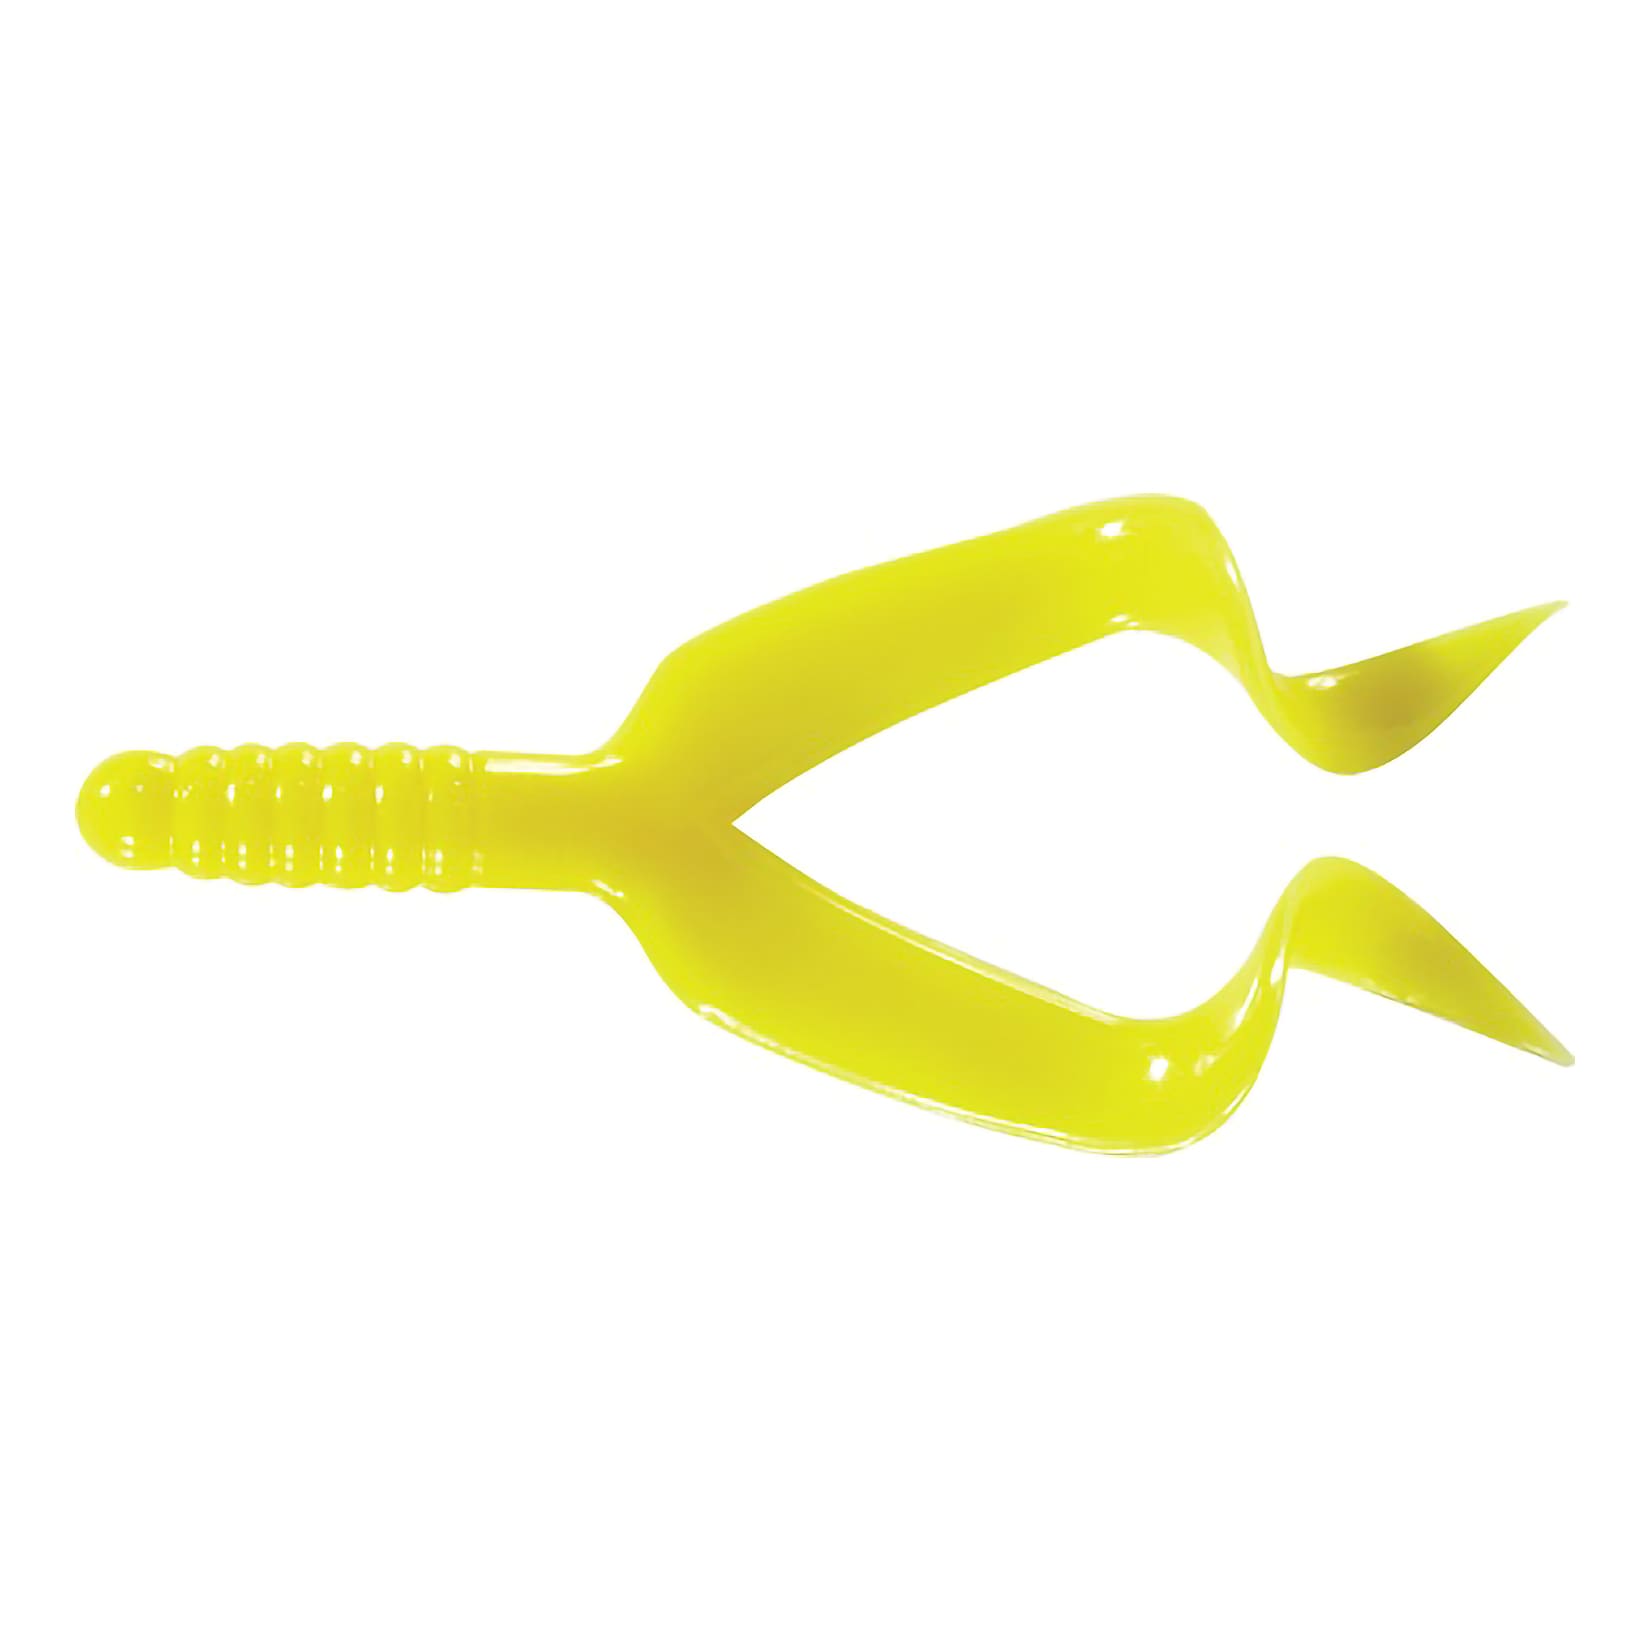 Mr. Twister Double Tail Lure – 10 Pack - Yellow